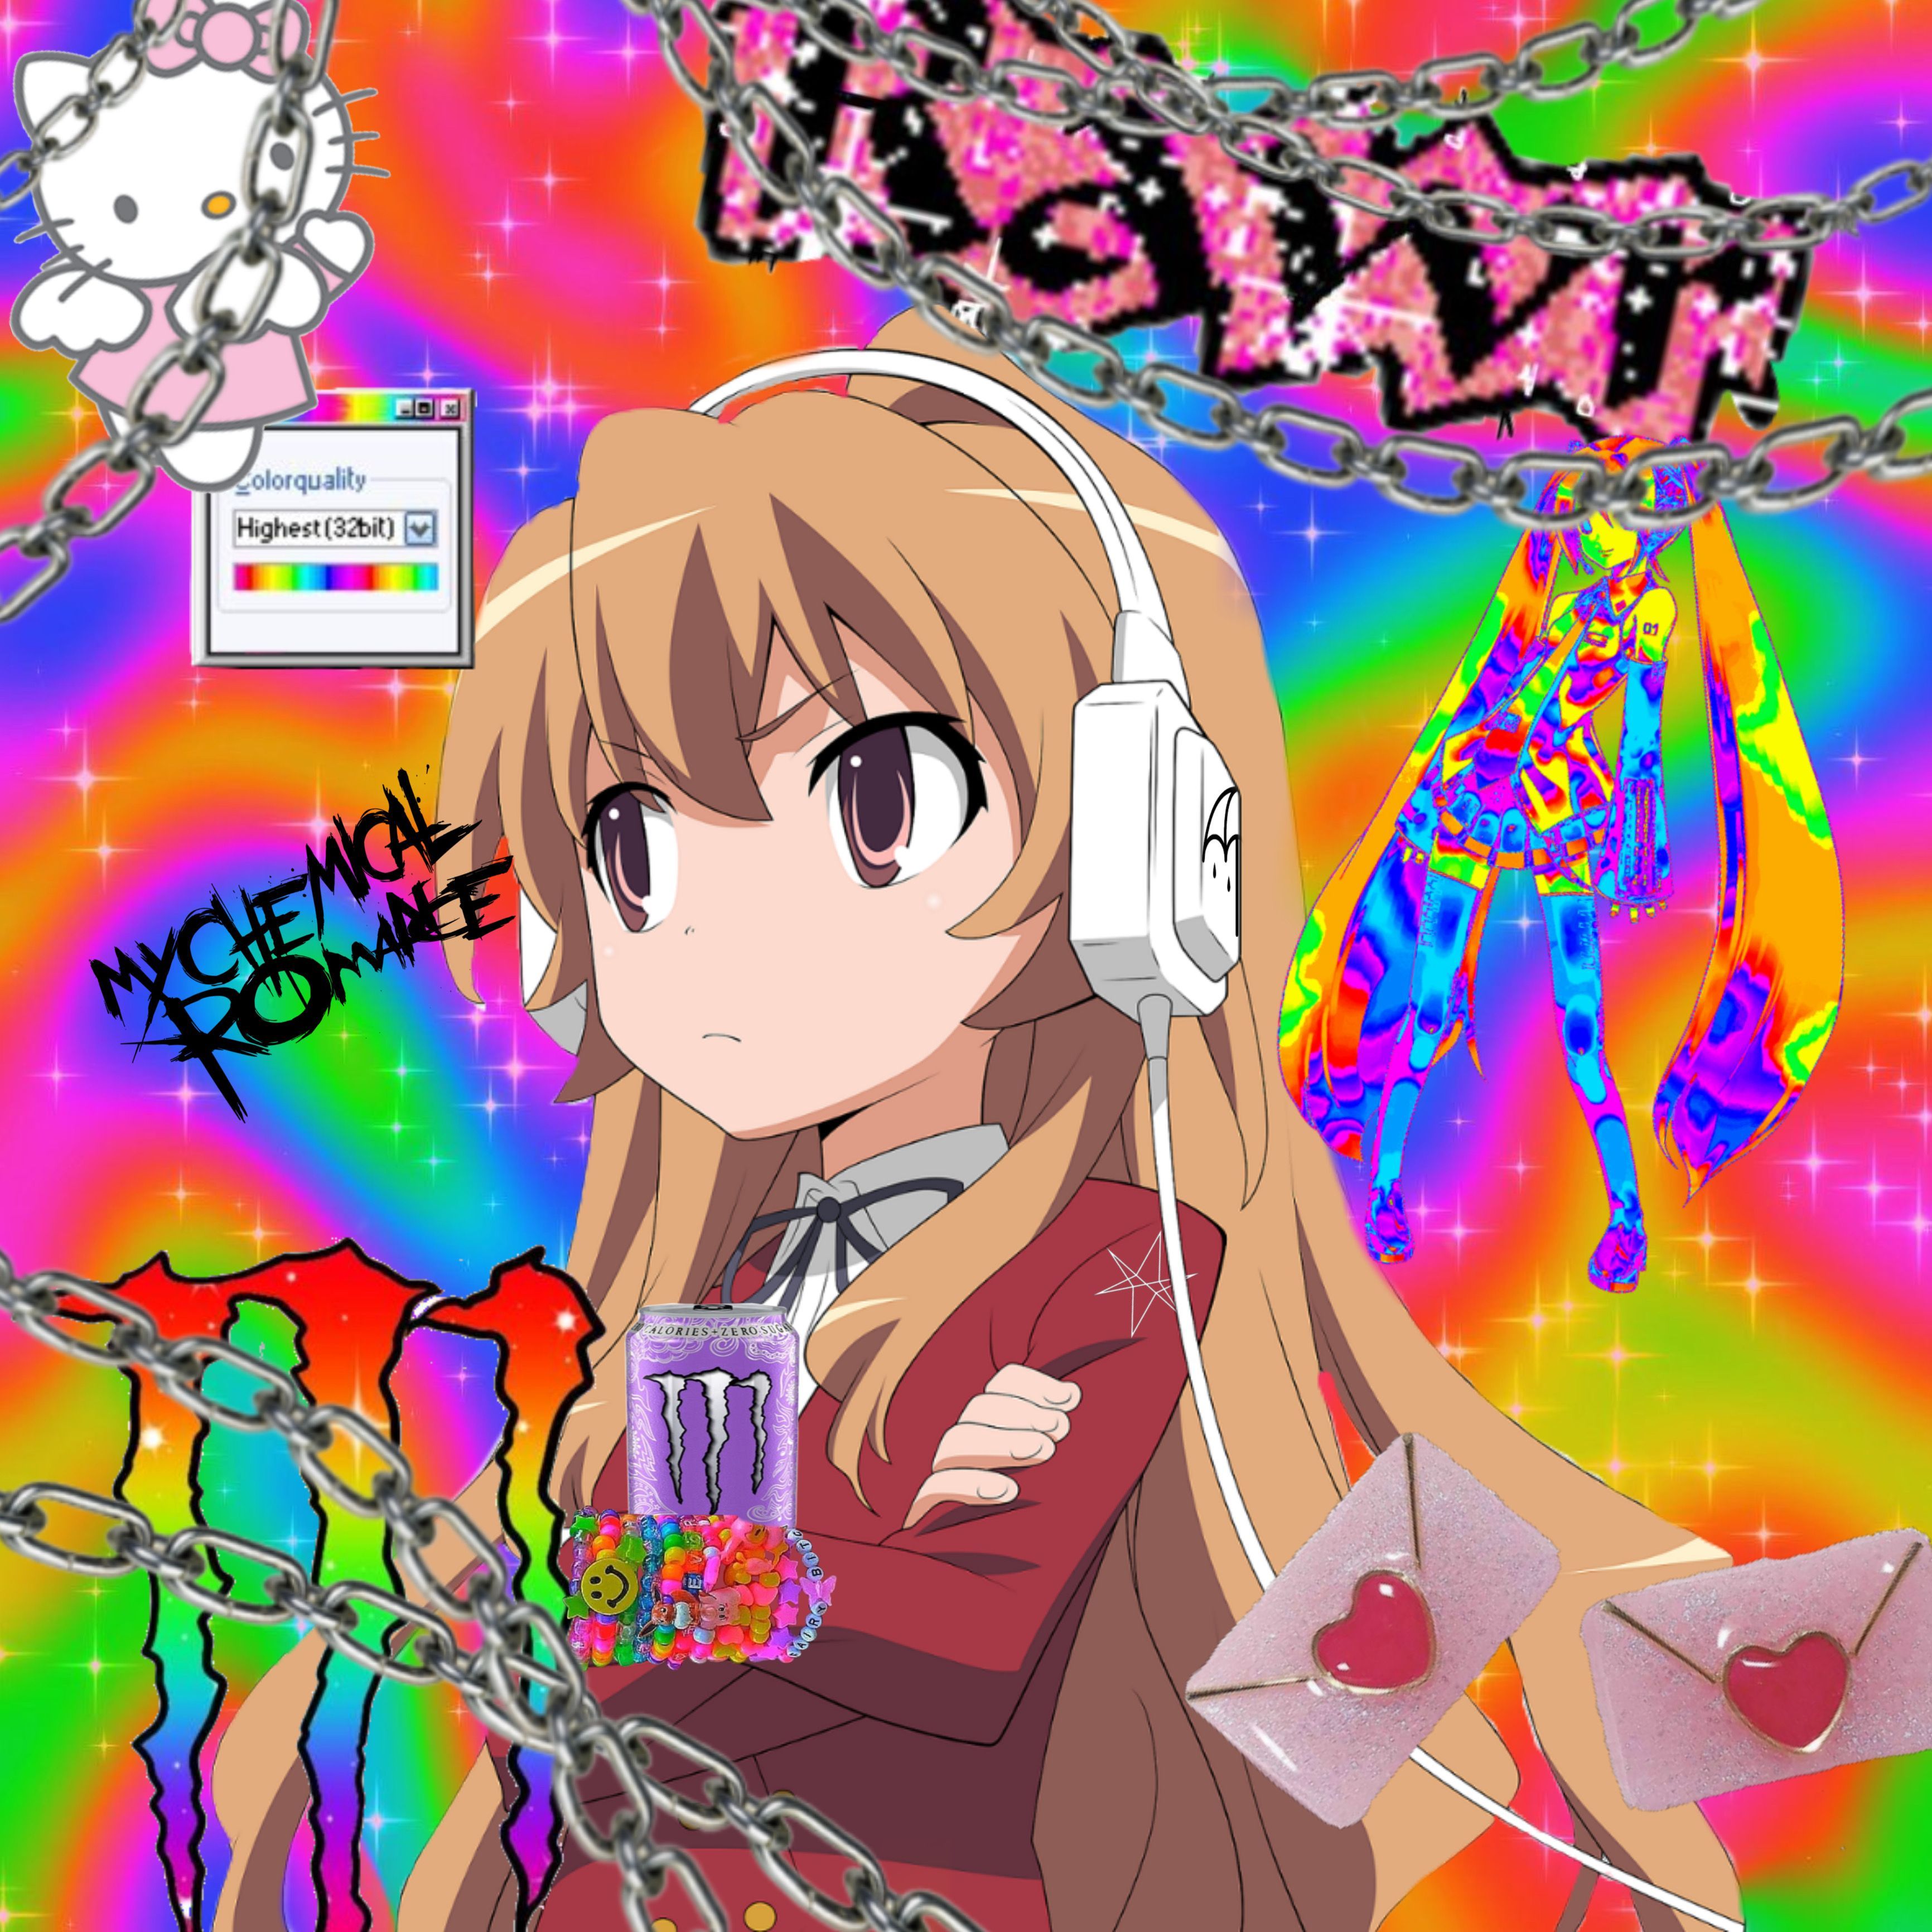 An anime girl with headphones on, with a rainbow background and the word 